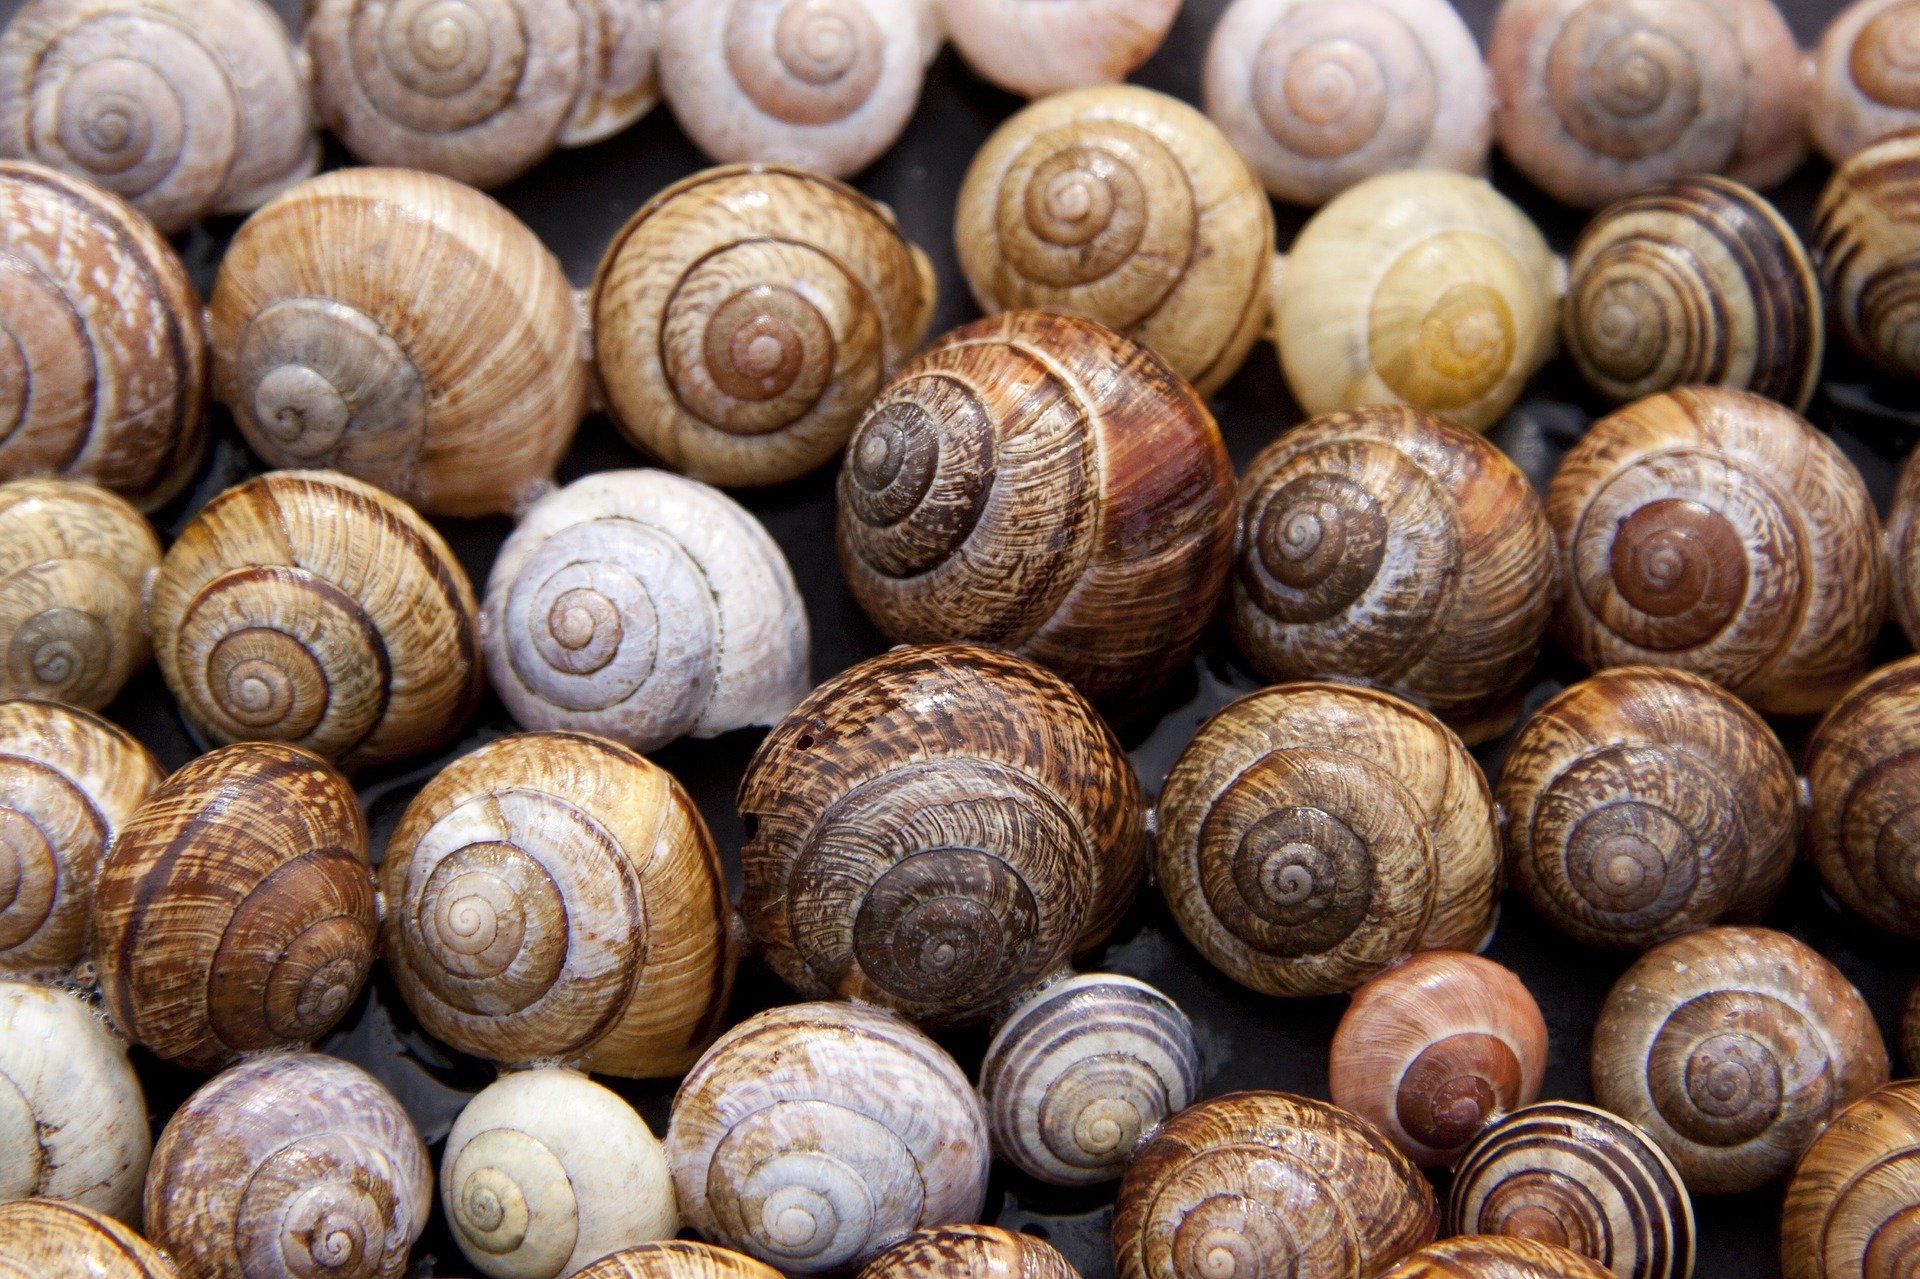 Different shell-sized snails placed together | Photo: Pixabay